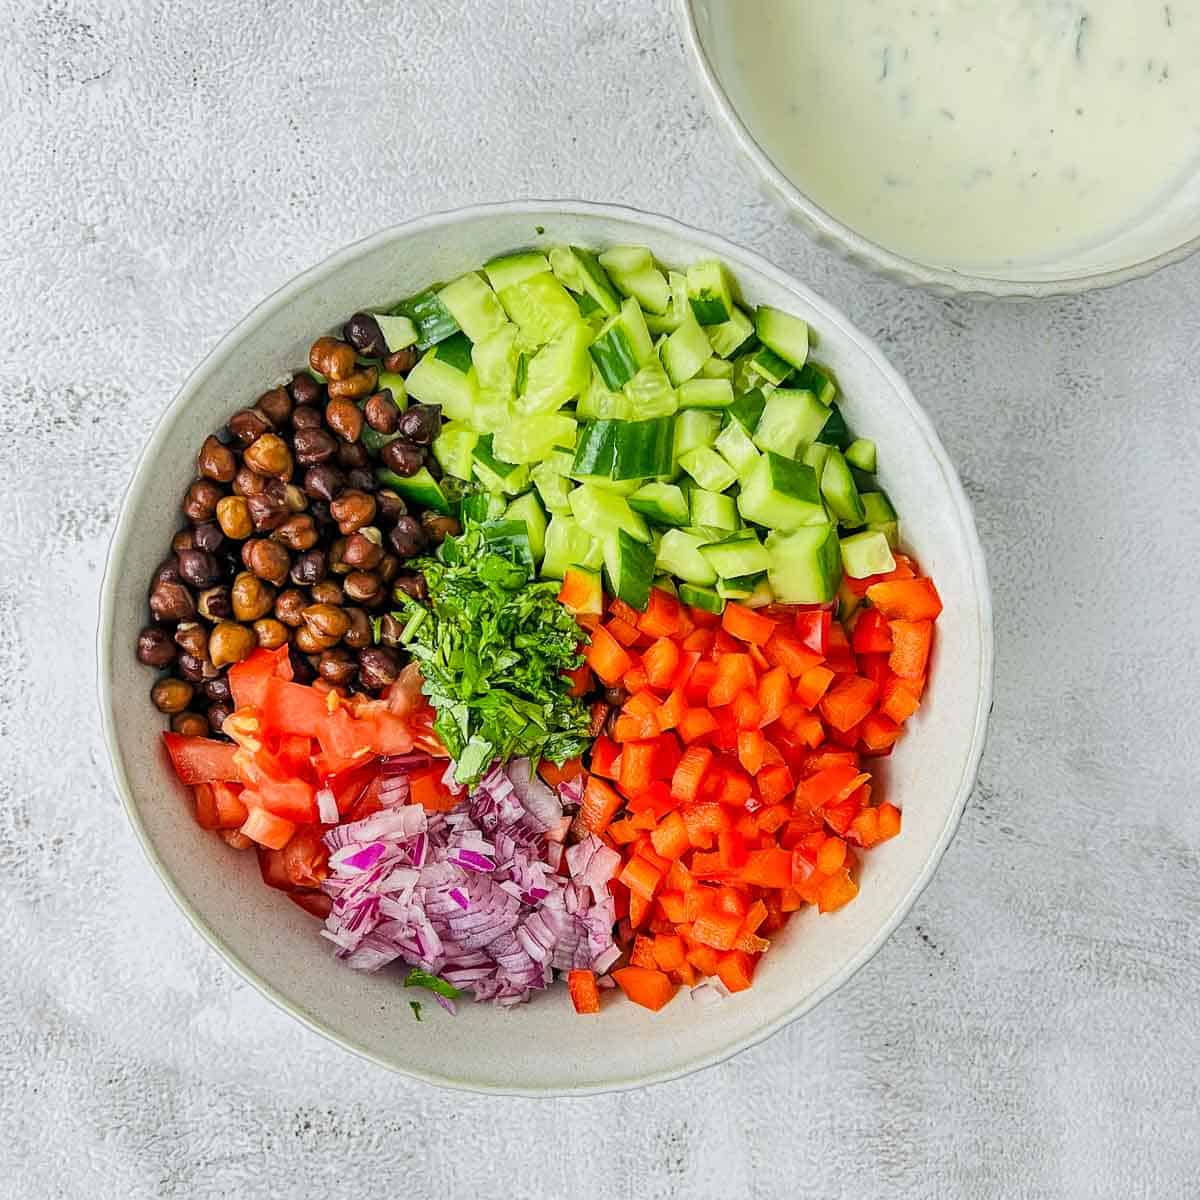 Boiled black chickpeas and veggies in a white bowl.